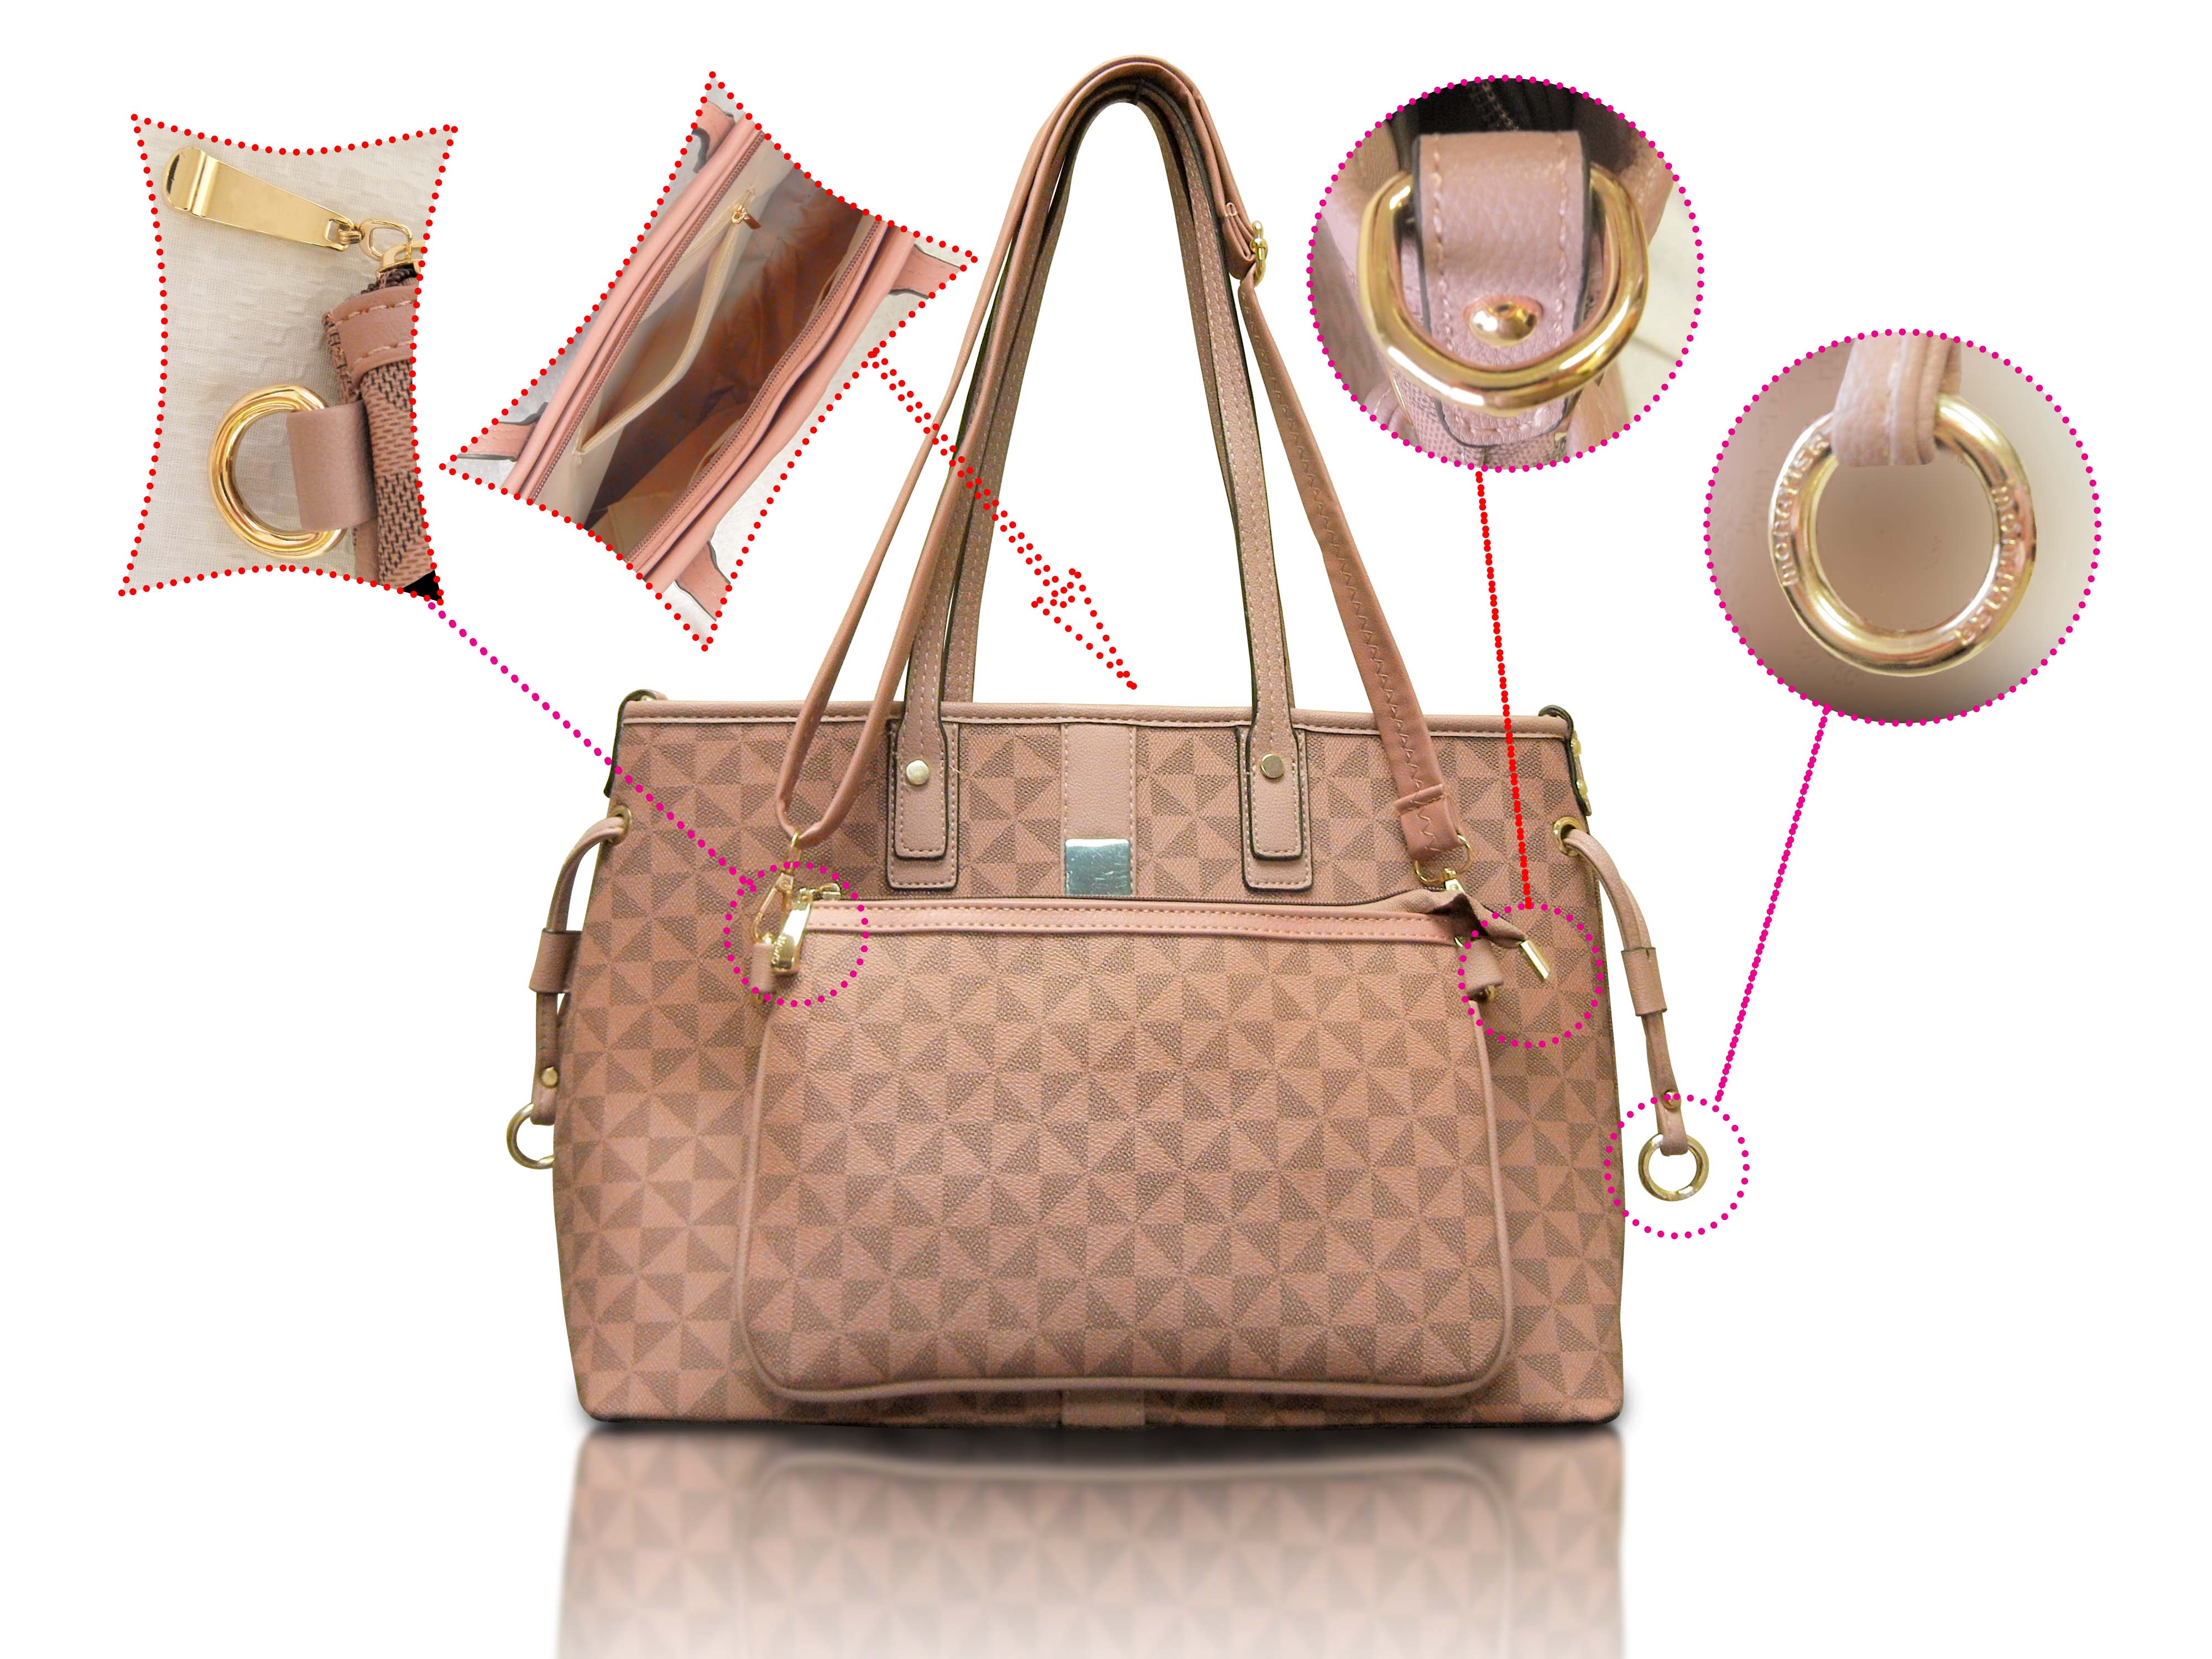 Pink Ladies Handbag with removable straps, large satchel bag,with small companion bag,wallet,